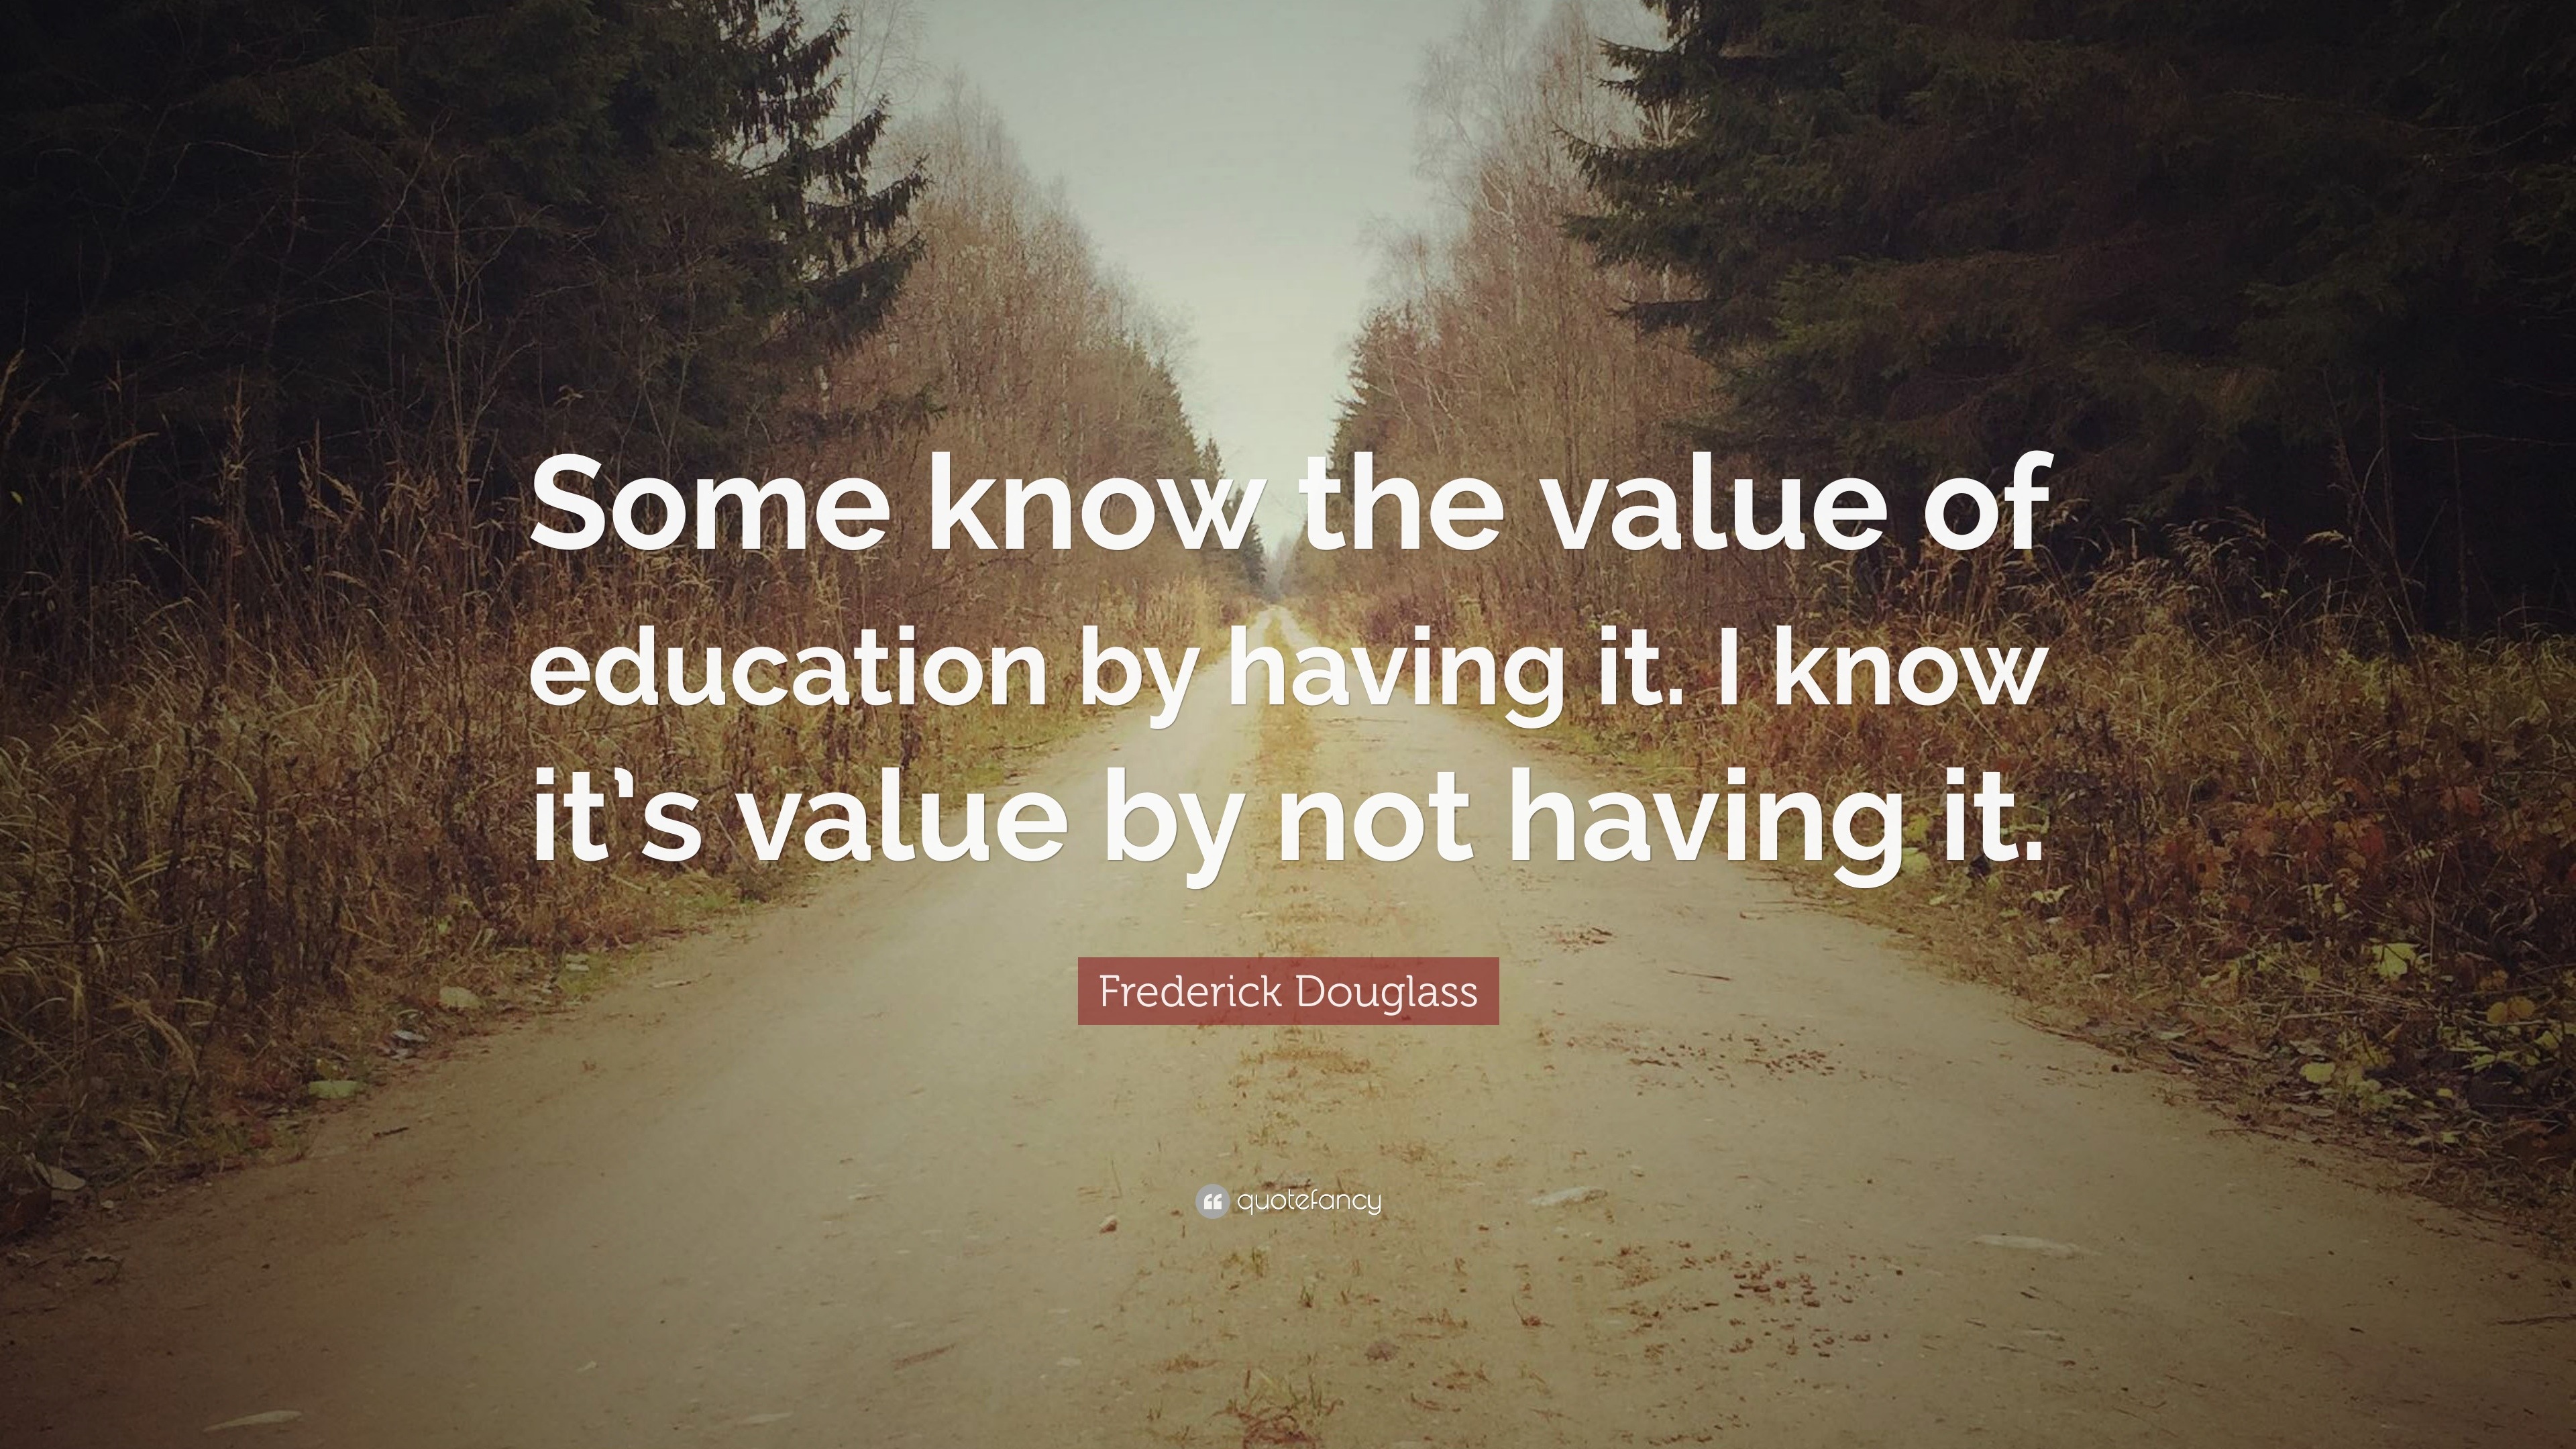 Frederick Douglass Quote “Some know the value of